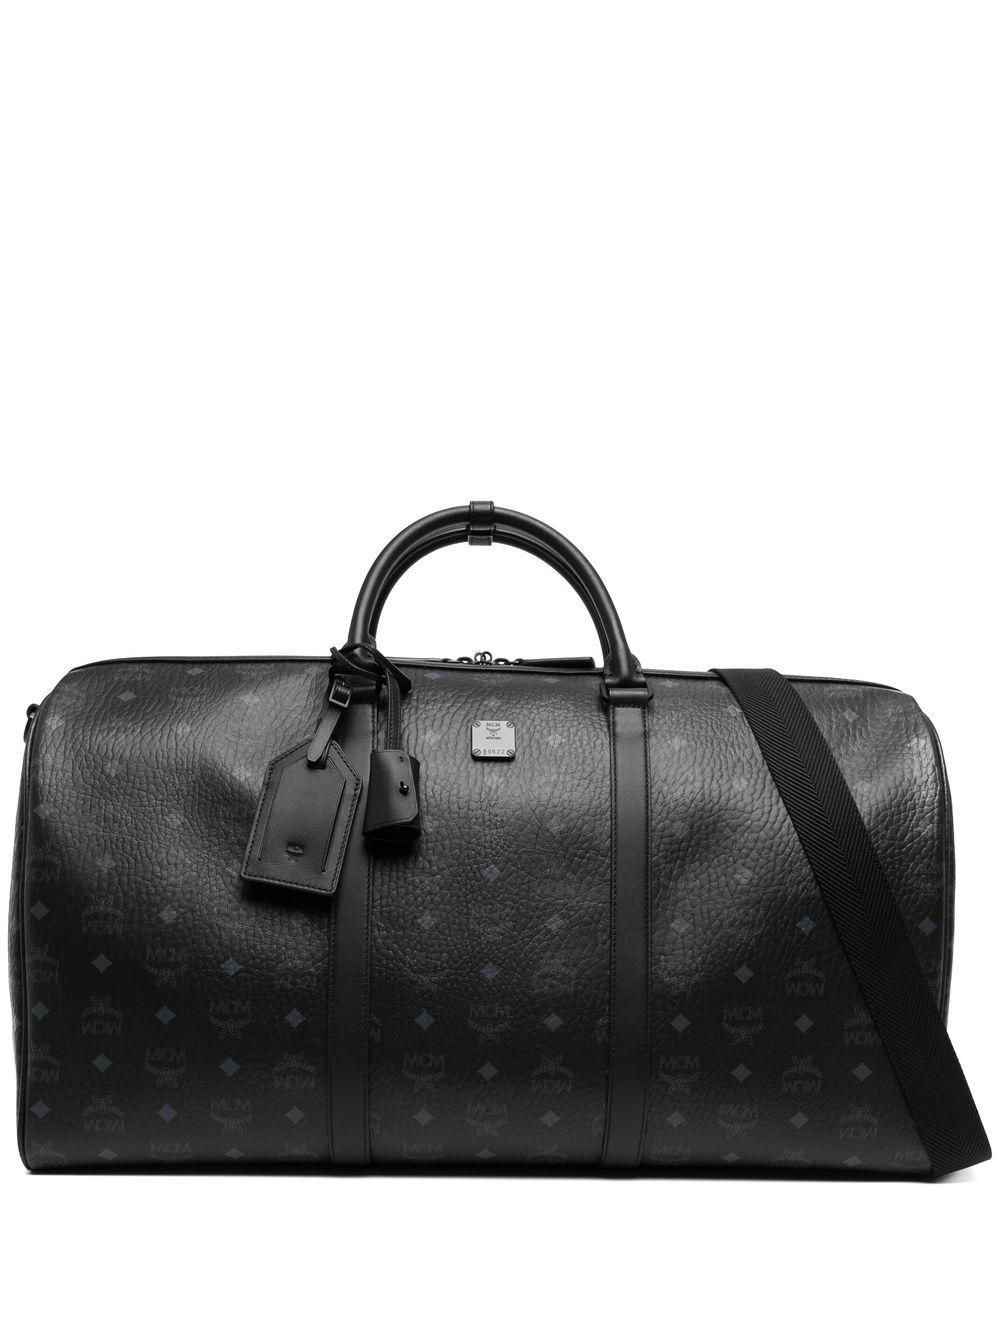 MCM Extra-large Ottomar Duffle Bag in Black | Lyst